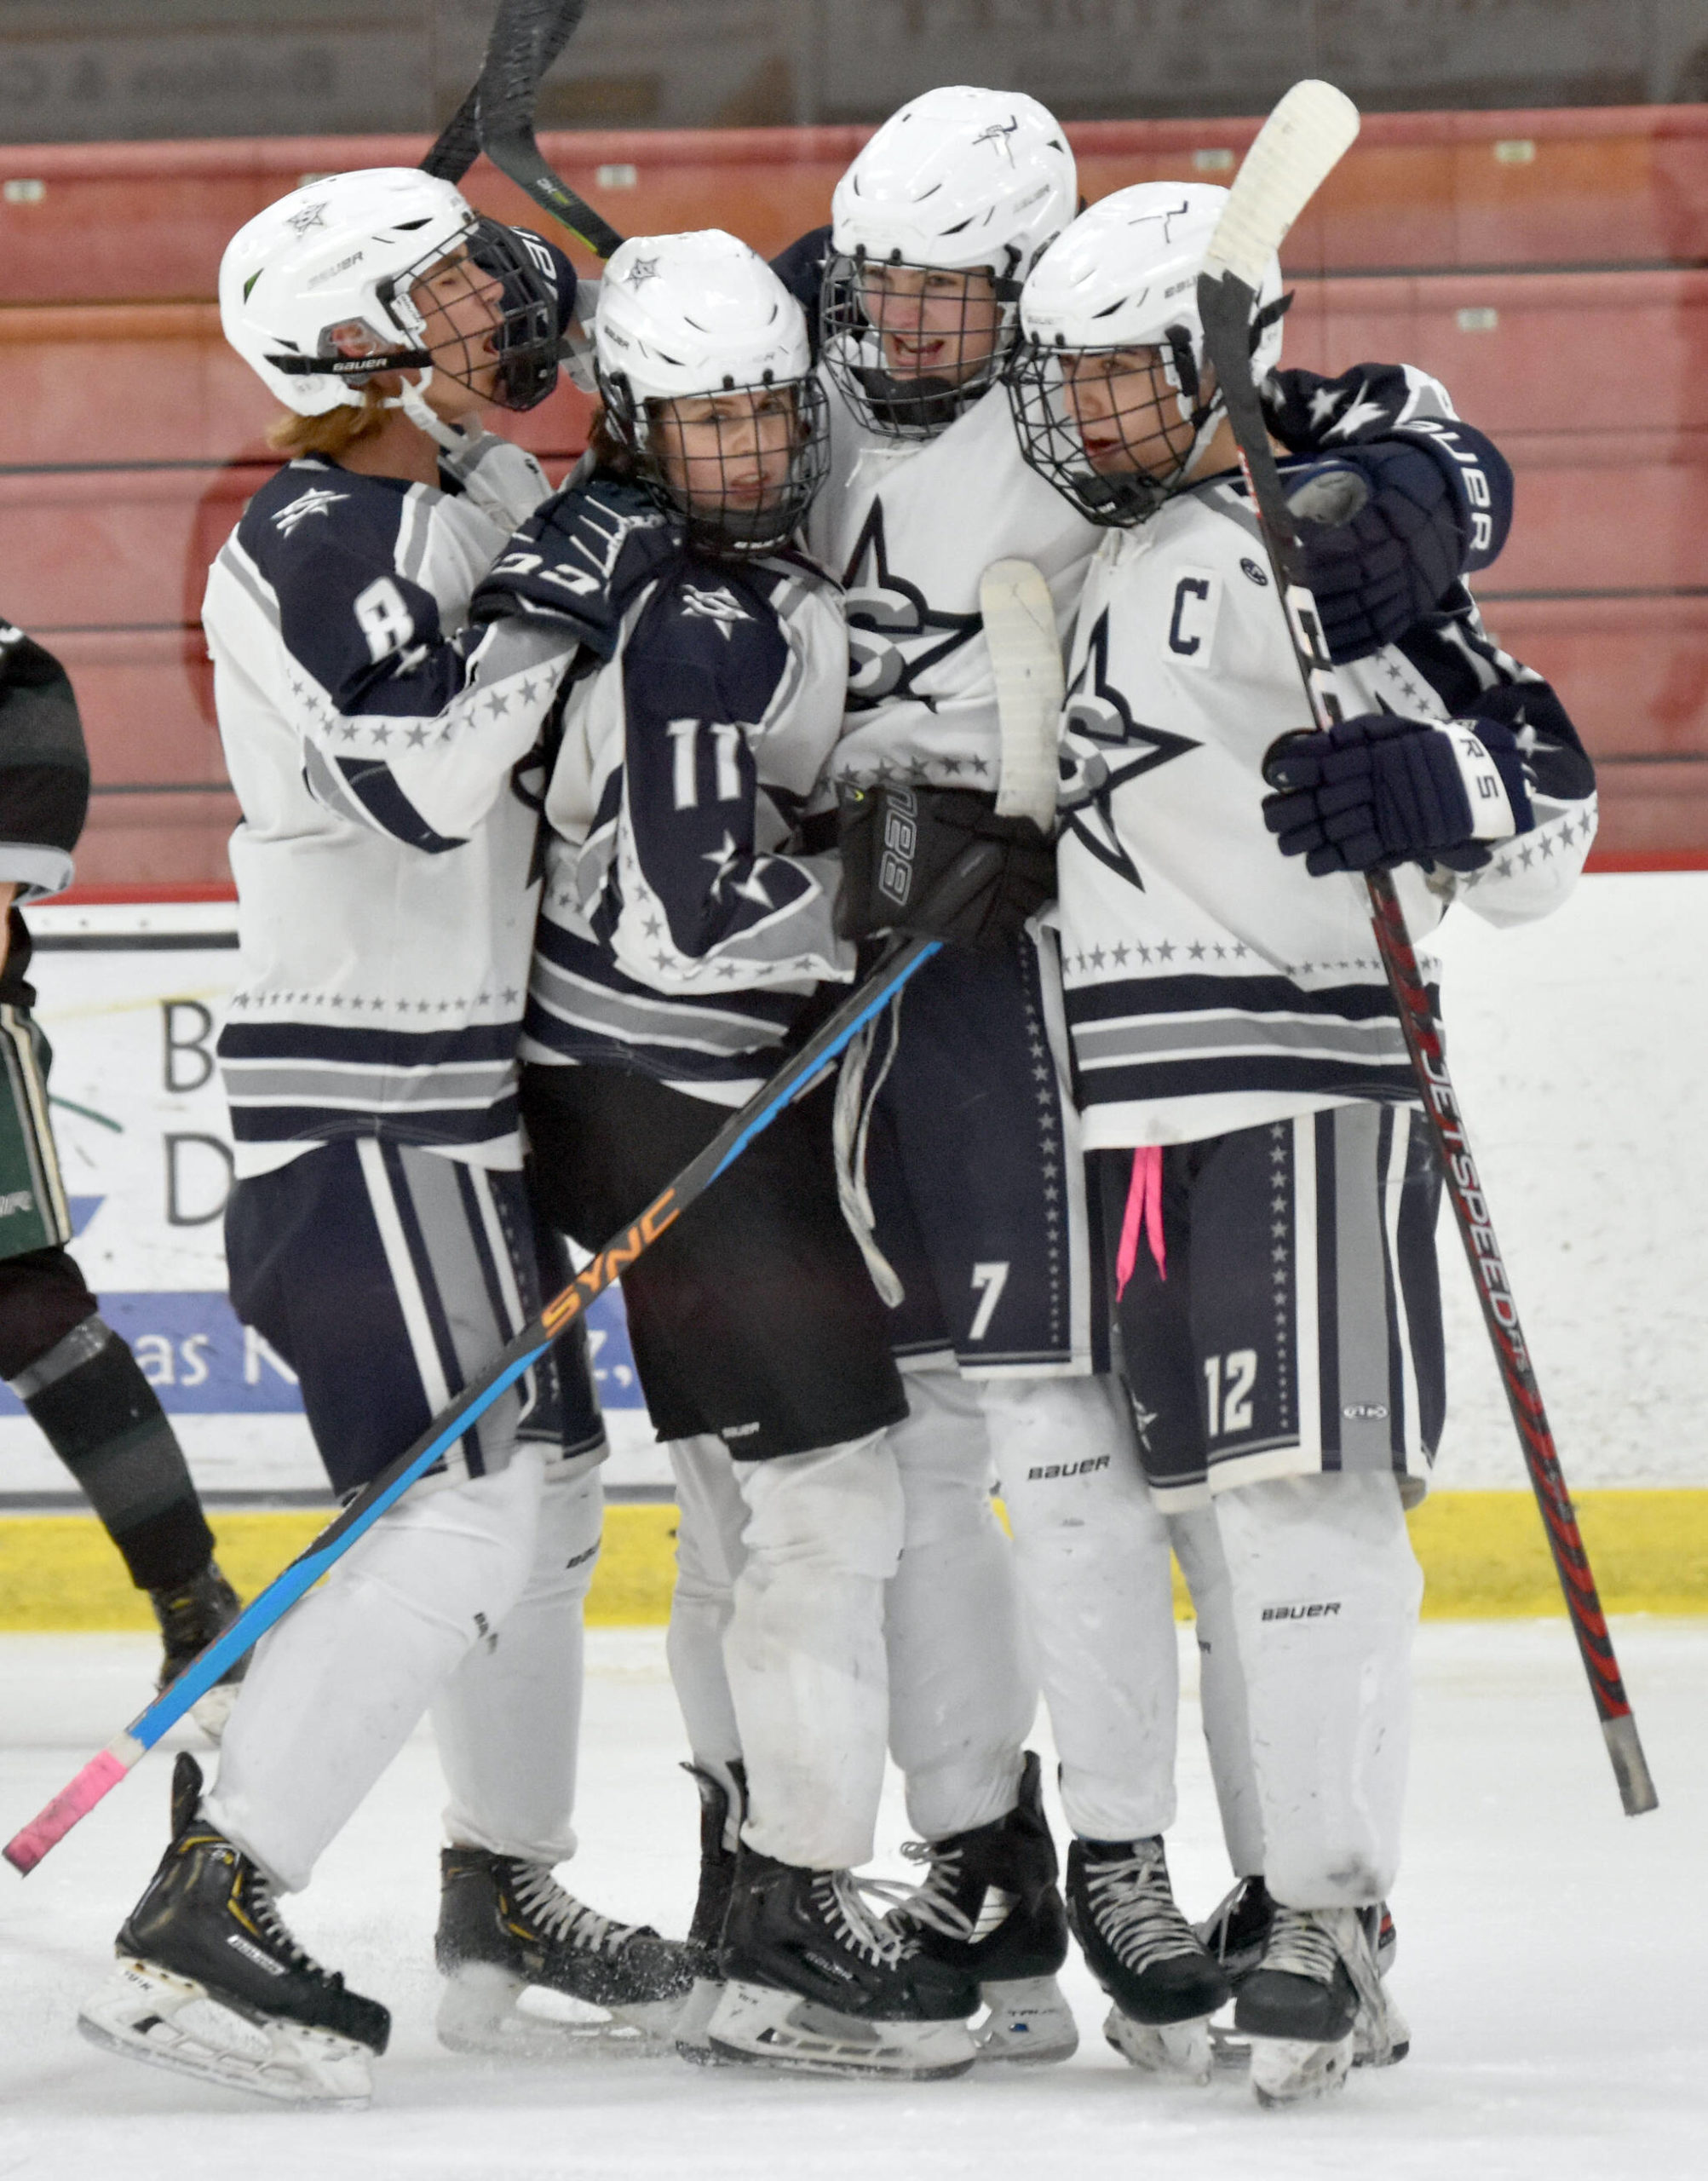 Soldotna’s Jace Appelhans (7) celebrates his first-period goal against Colony with Dawson Lockwood, Boone Theiler and Aiden Burcham on Saturday, Jan. 7, 2023, at the Soldotna Regional Sports Complex in Soldotna, Alaska. (Photo by Jeff Helminiak/Peninsula Clarion)